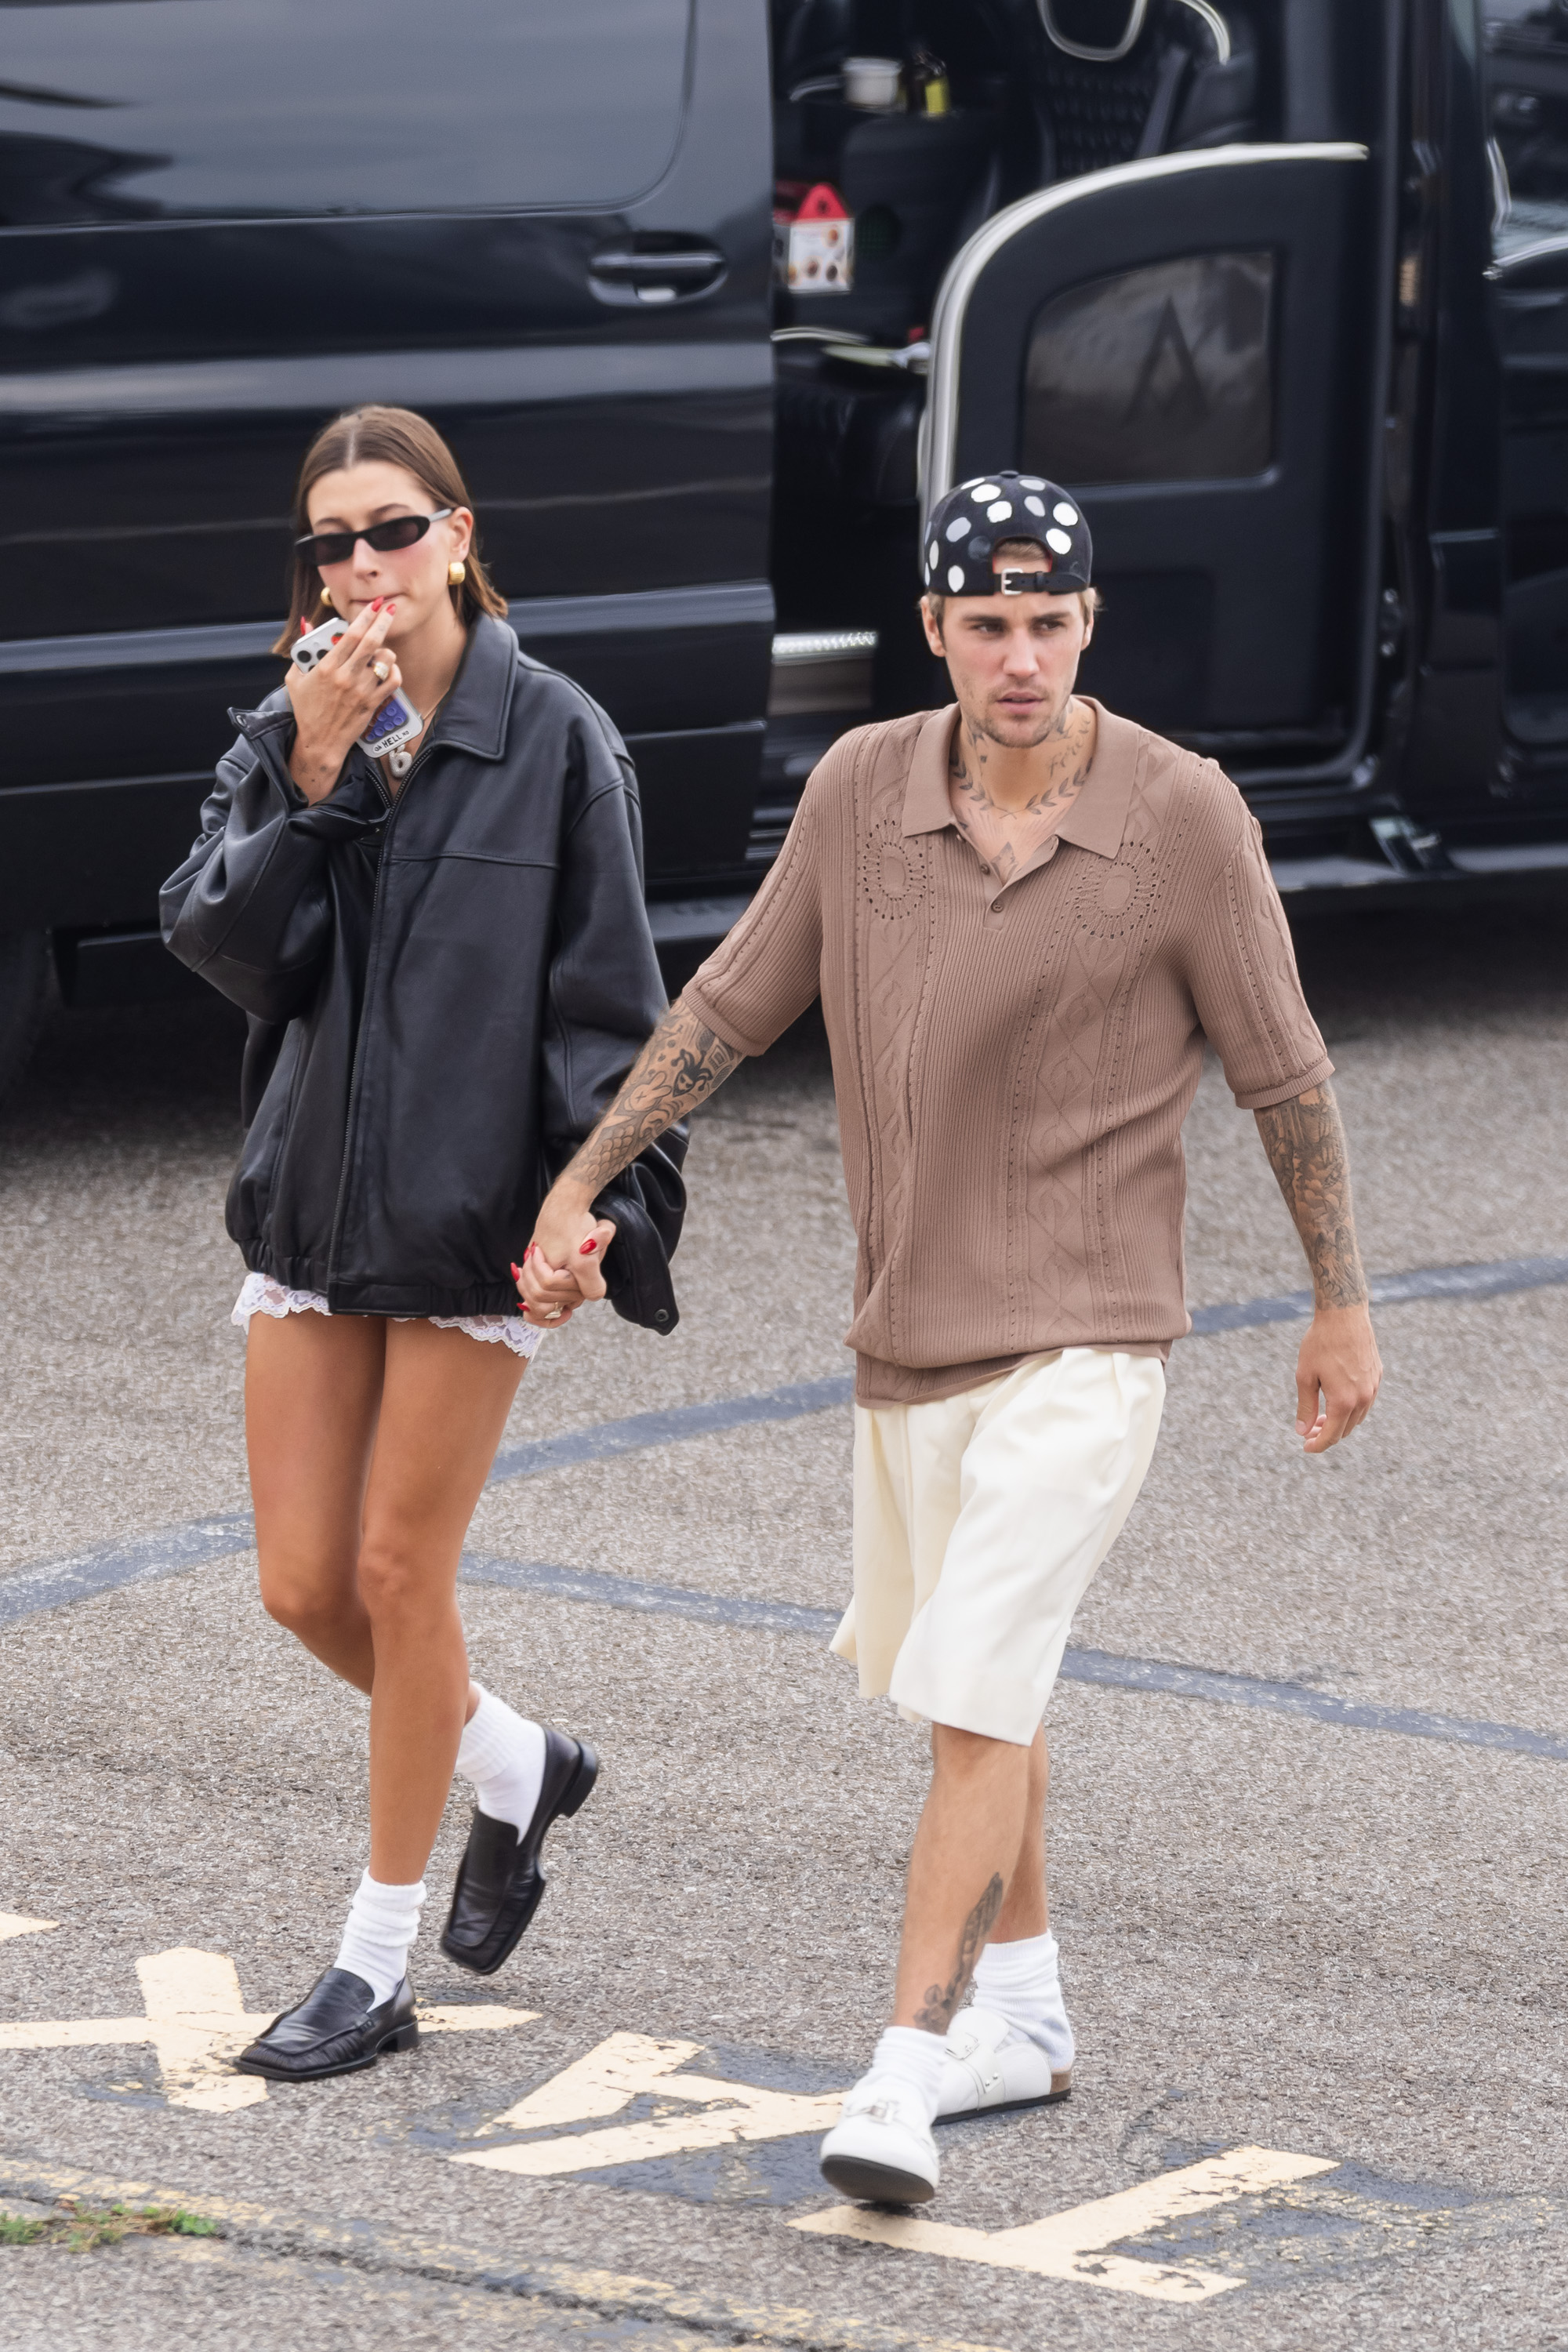 An insider said: 'Divorce is not an option for' Justin and Hailey even as they are 'going through a tough time'